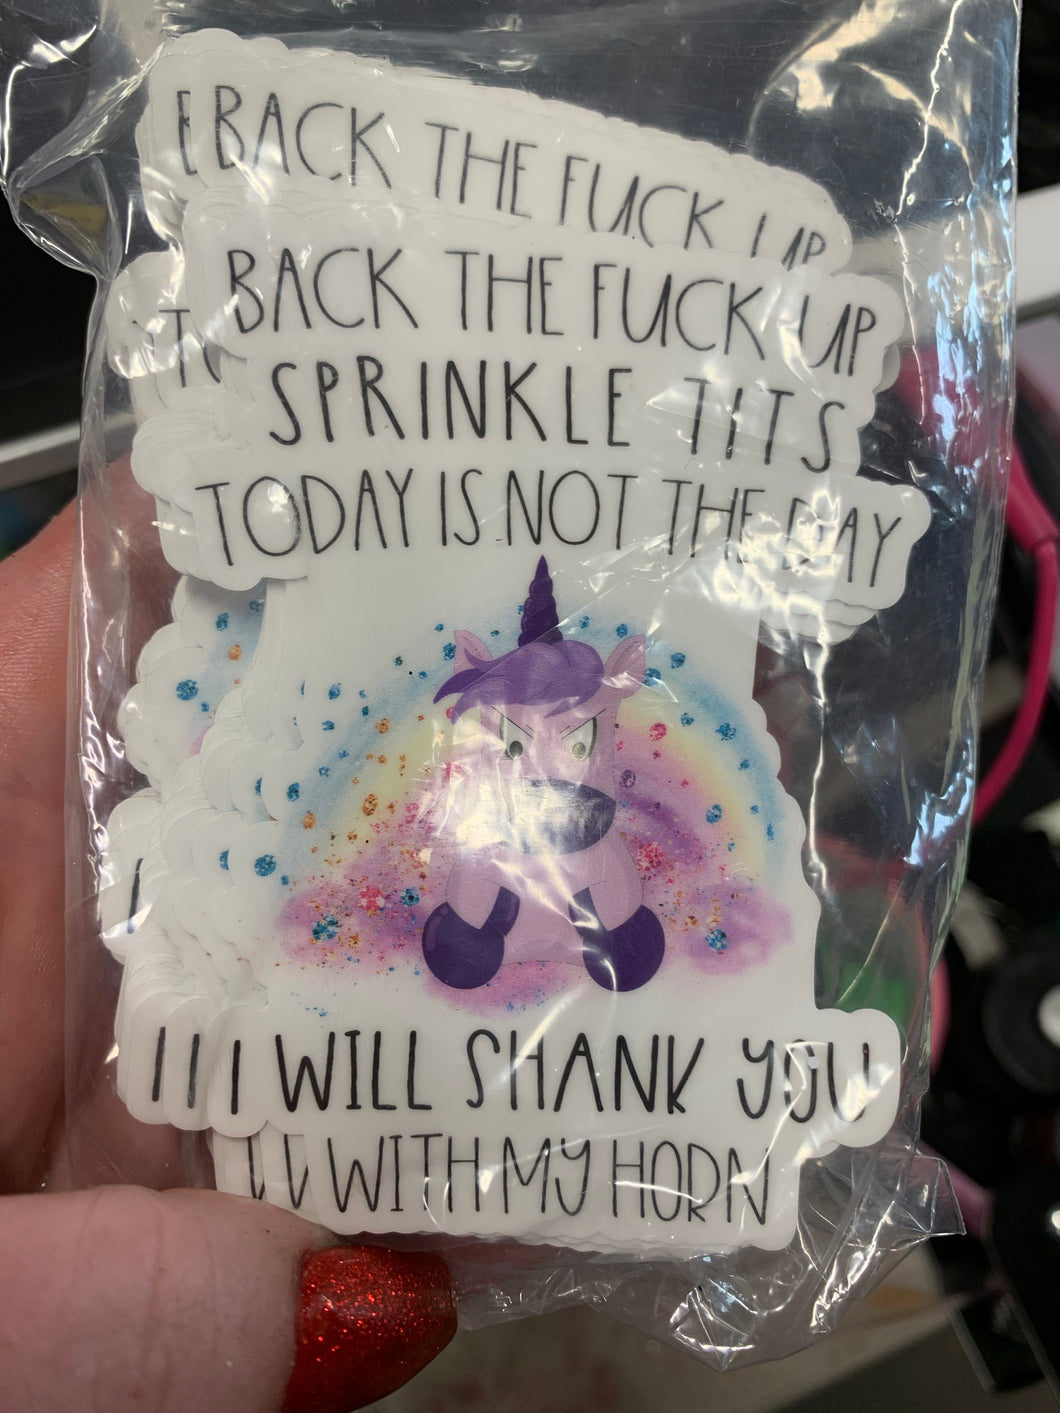 Back up sprinkle tits - Main glitter site 